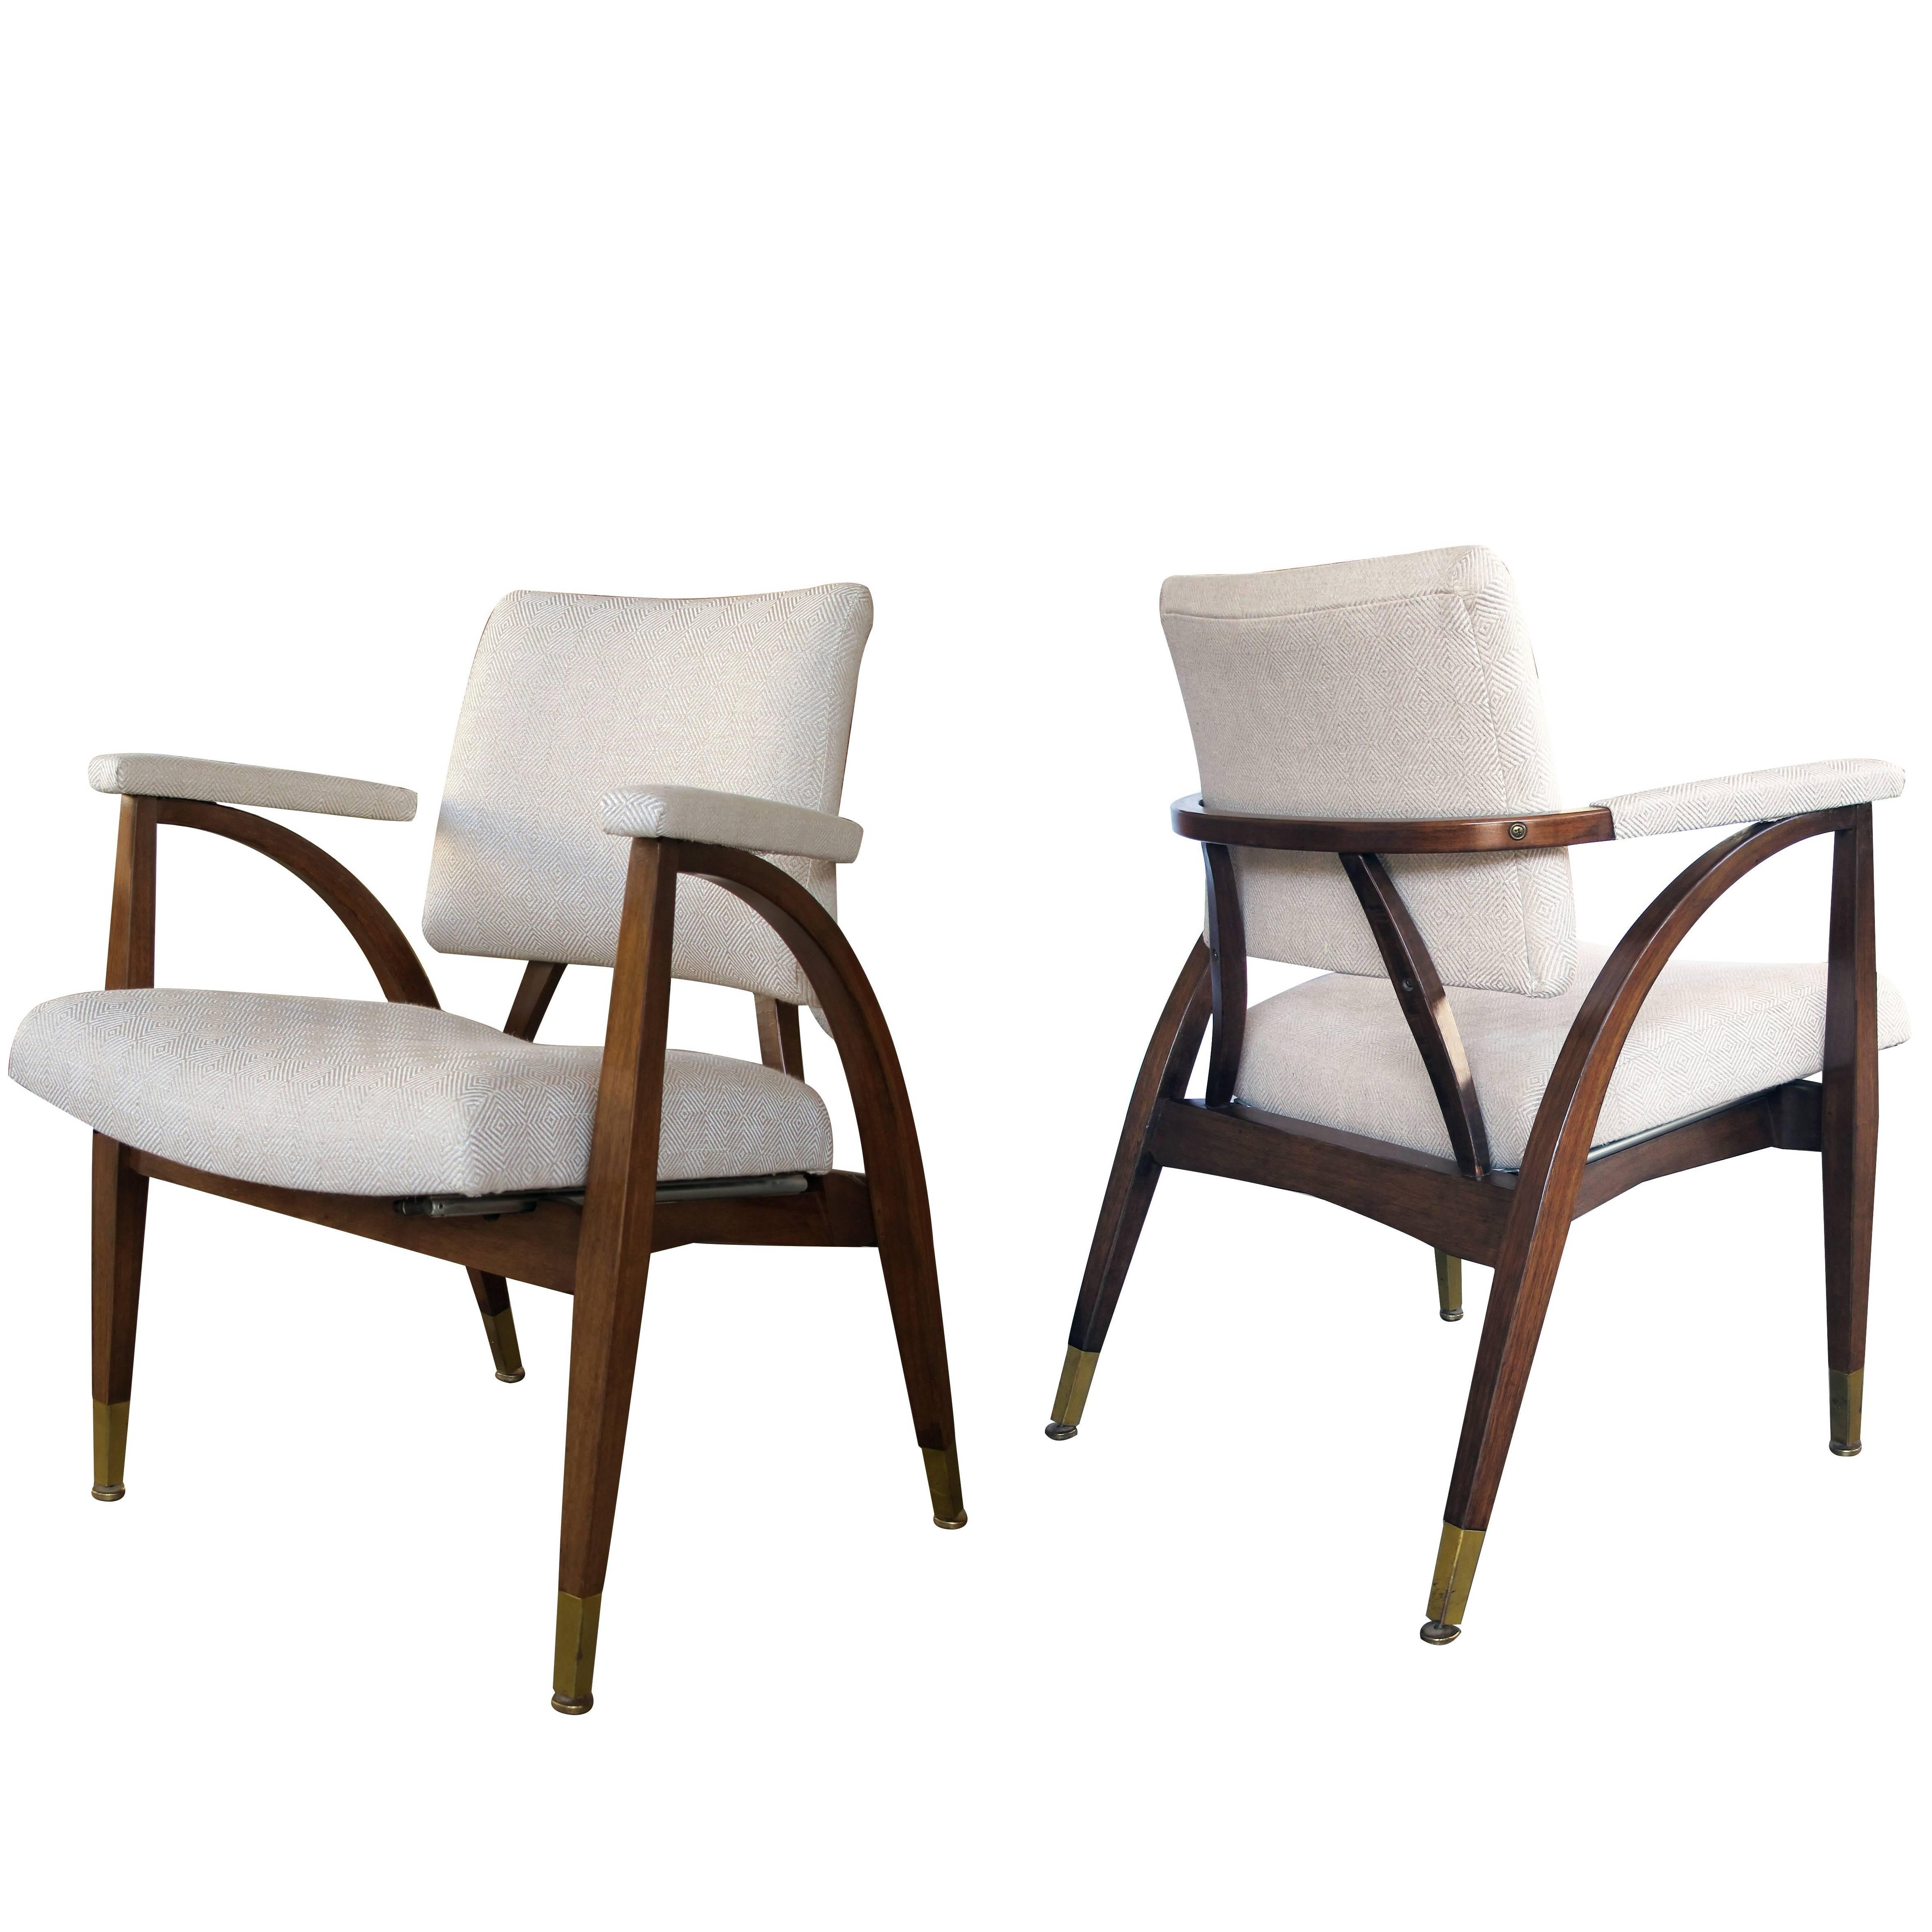 Sculptural Pair of American Armchairs with Shapely Frame, Boling Chair Co, 1949